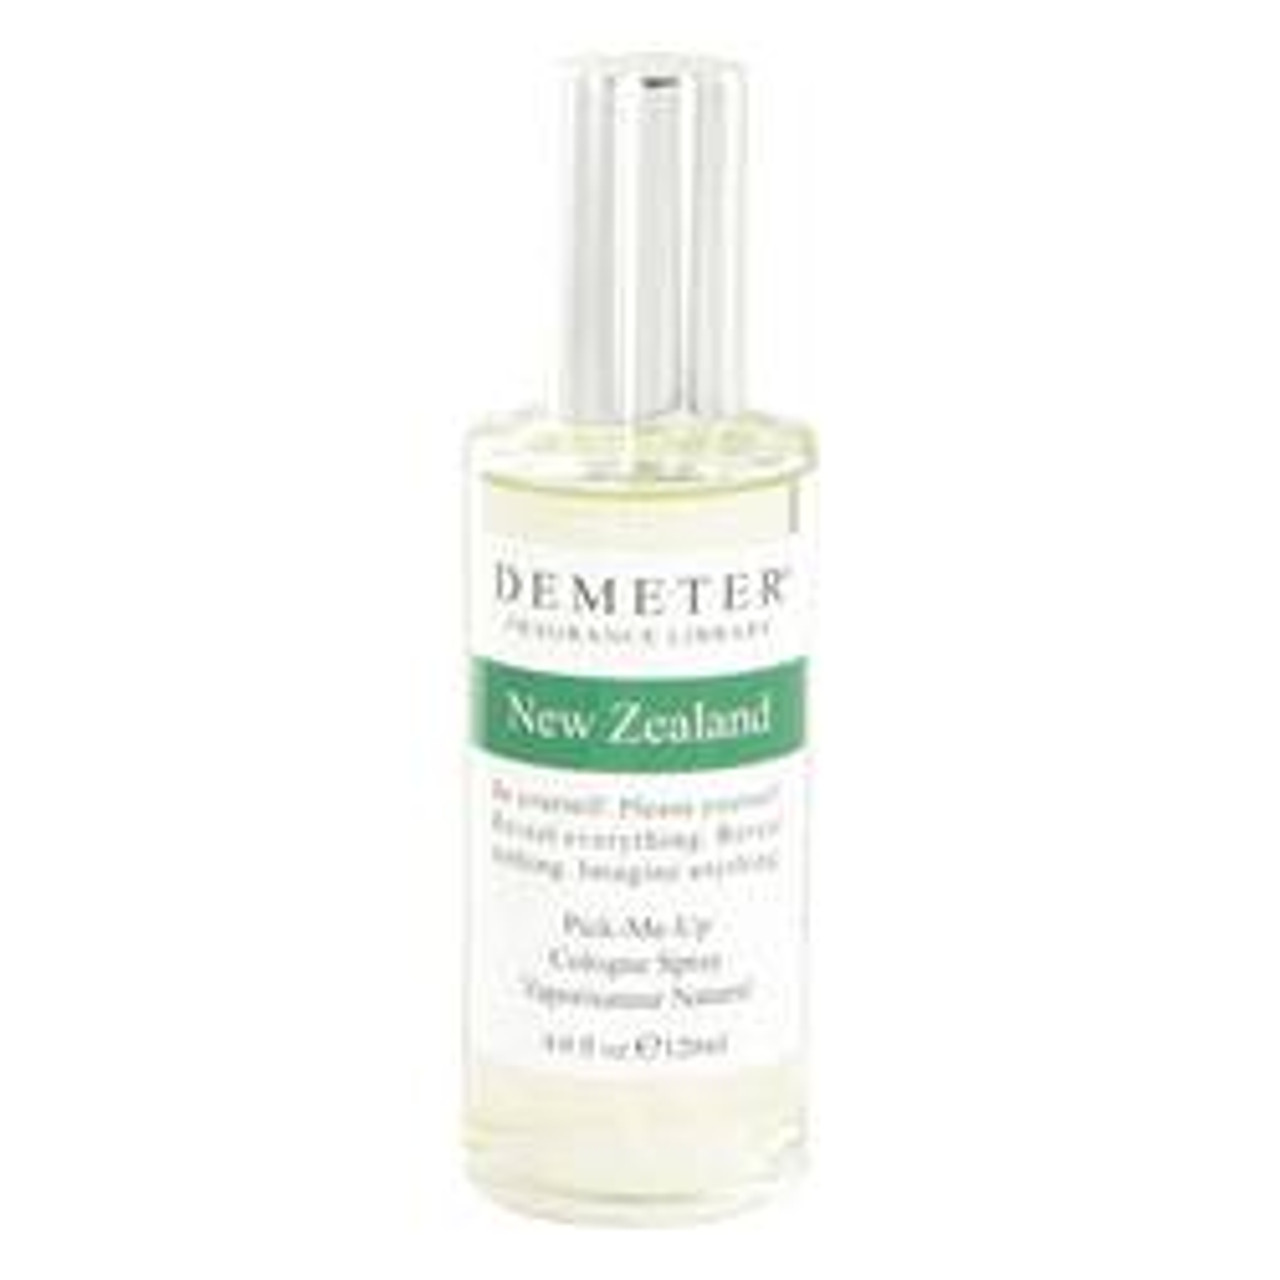 Demeter New Zealand Perfume By Demeter Cologne Spray (Unisex) 4 oz for Women - [From 79.50 - Choose pk Qty ] - *Ships from Miami